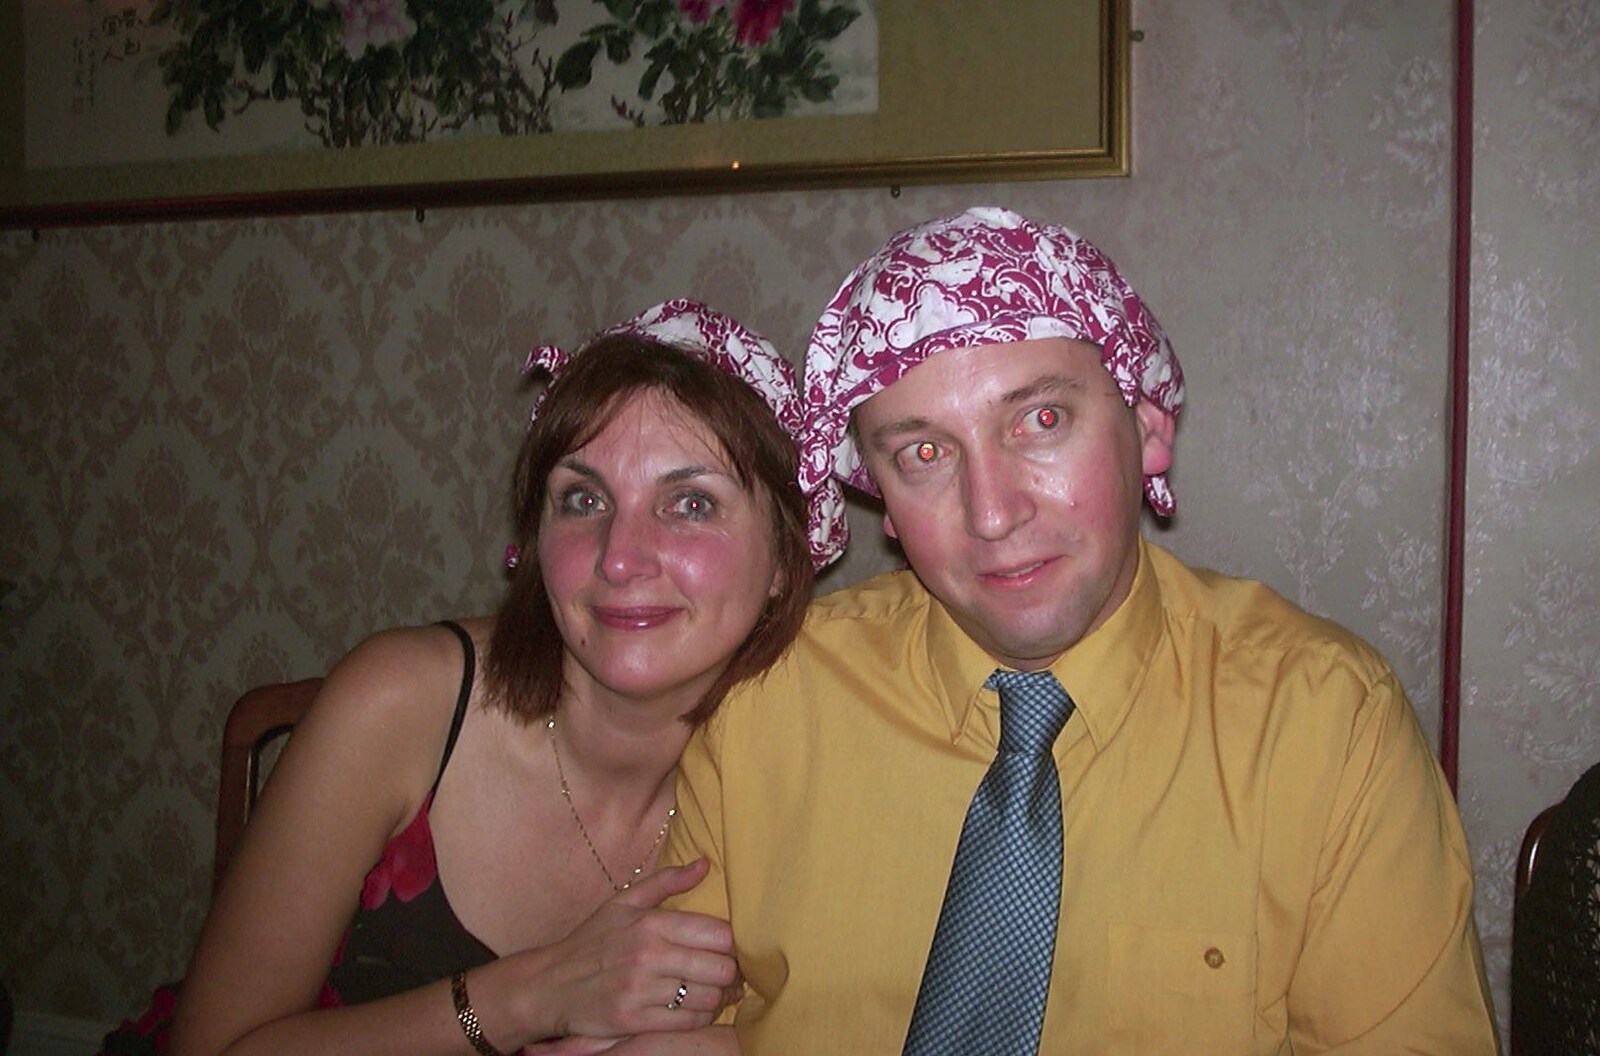 Anne and Nigel both have serviettes on their heads from Anne's Satis House Night, Yoxford, Suffolk - 11th March 2003